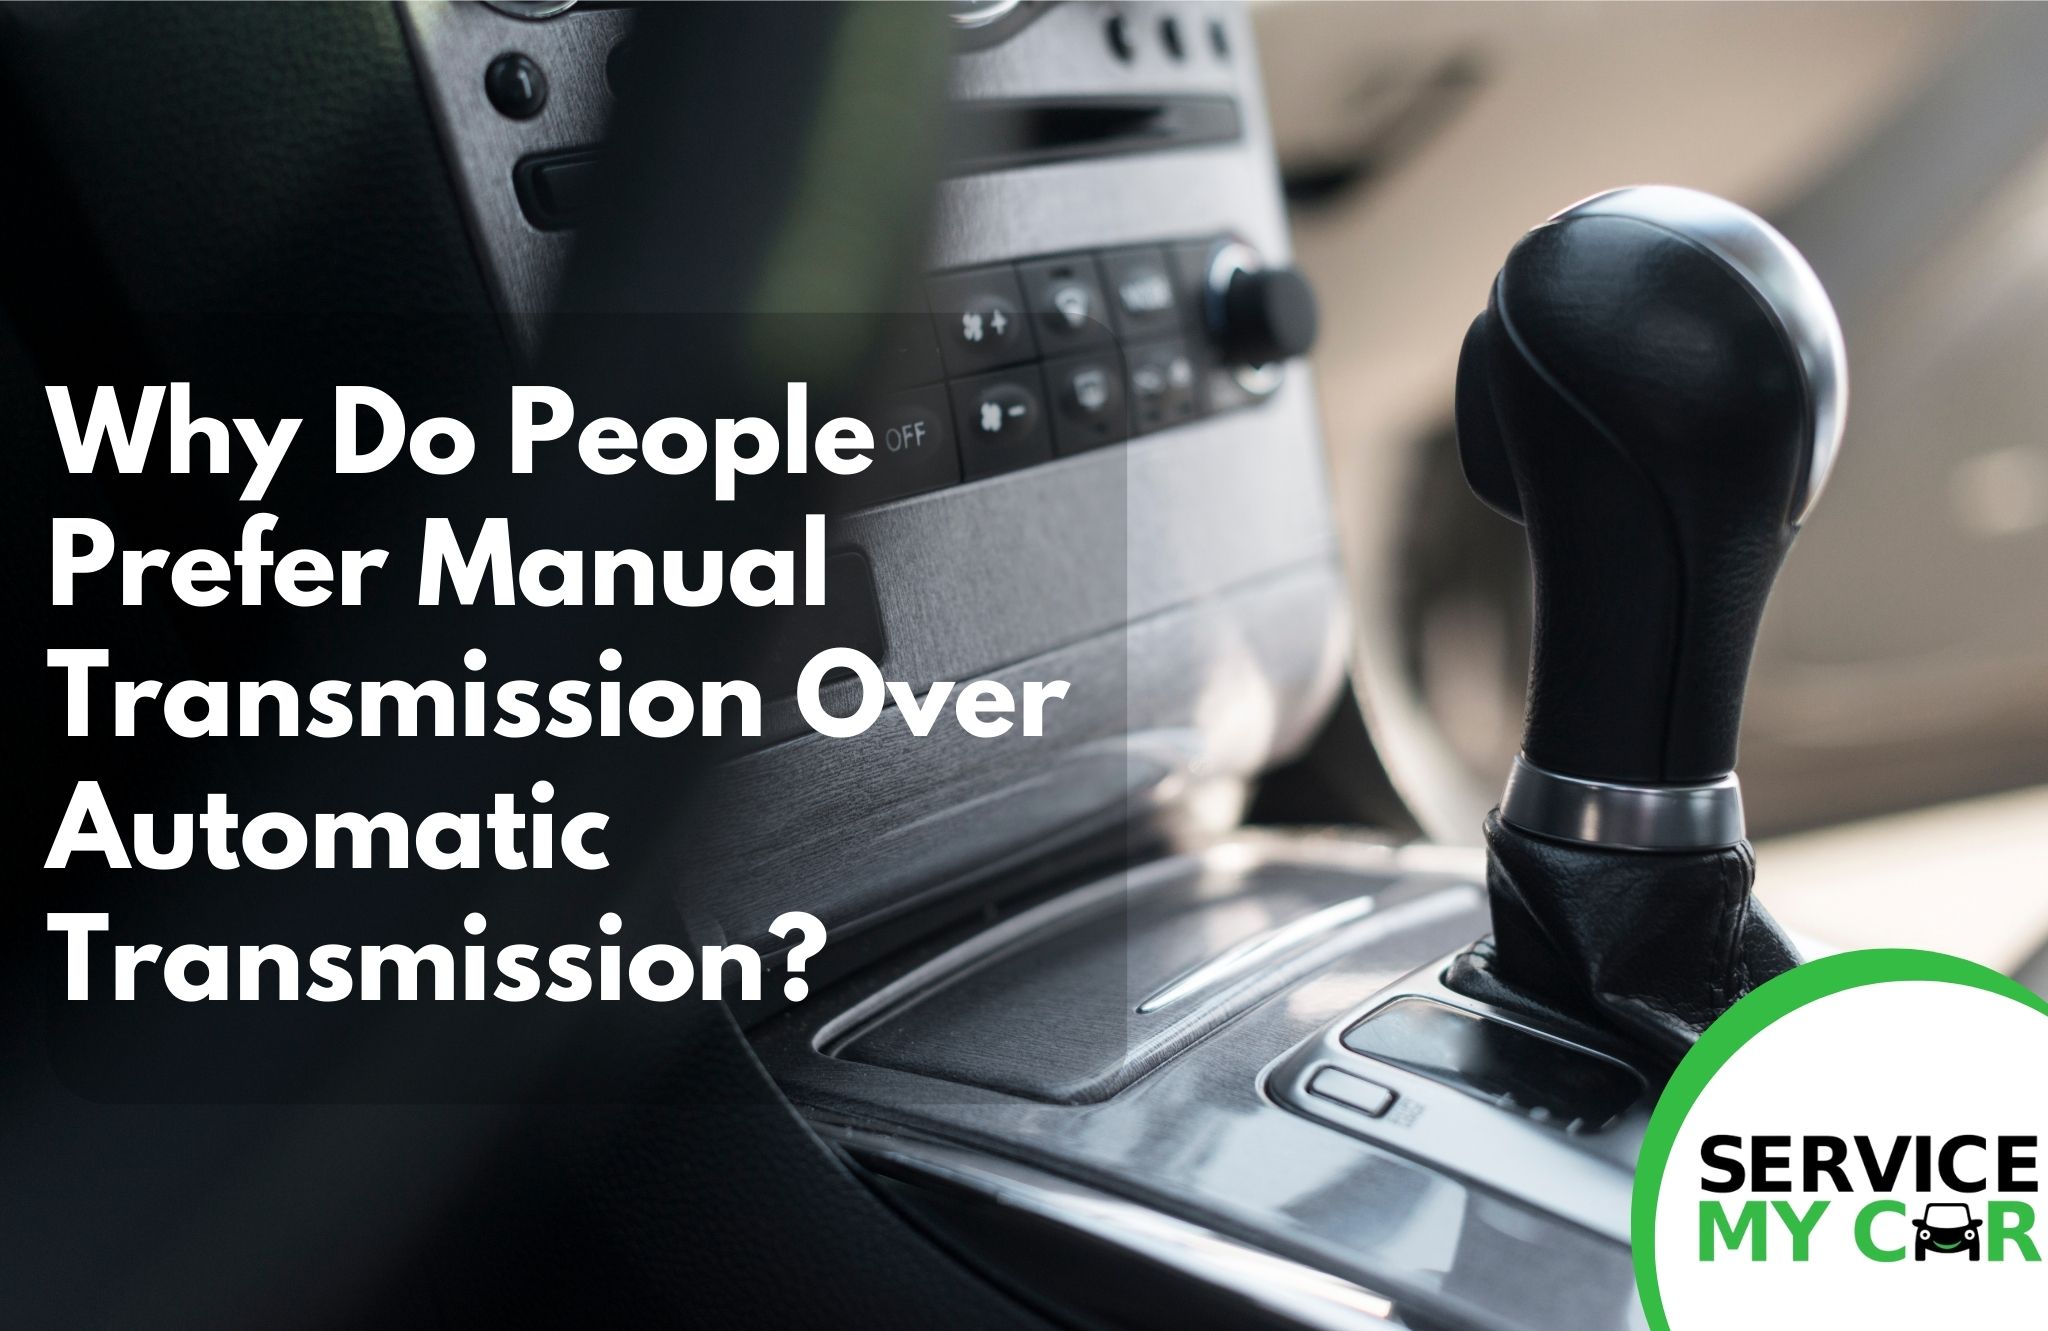 Why Do People Prefer Manual Transmission Over Automatic Transmission?